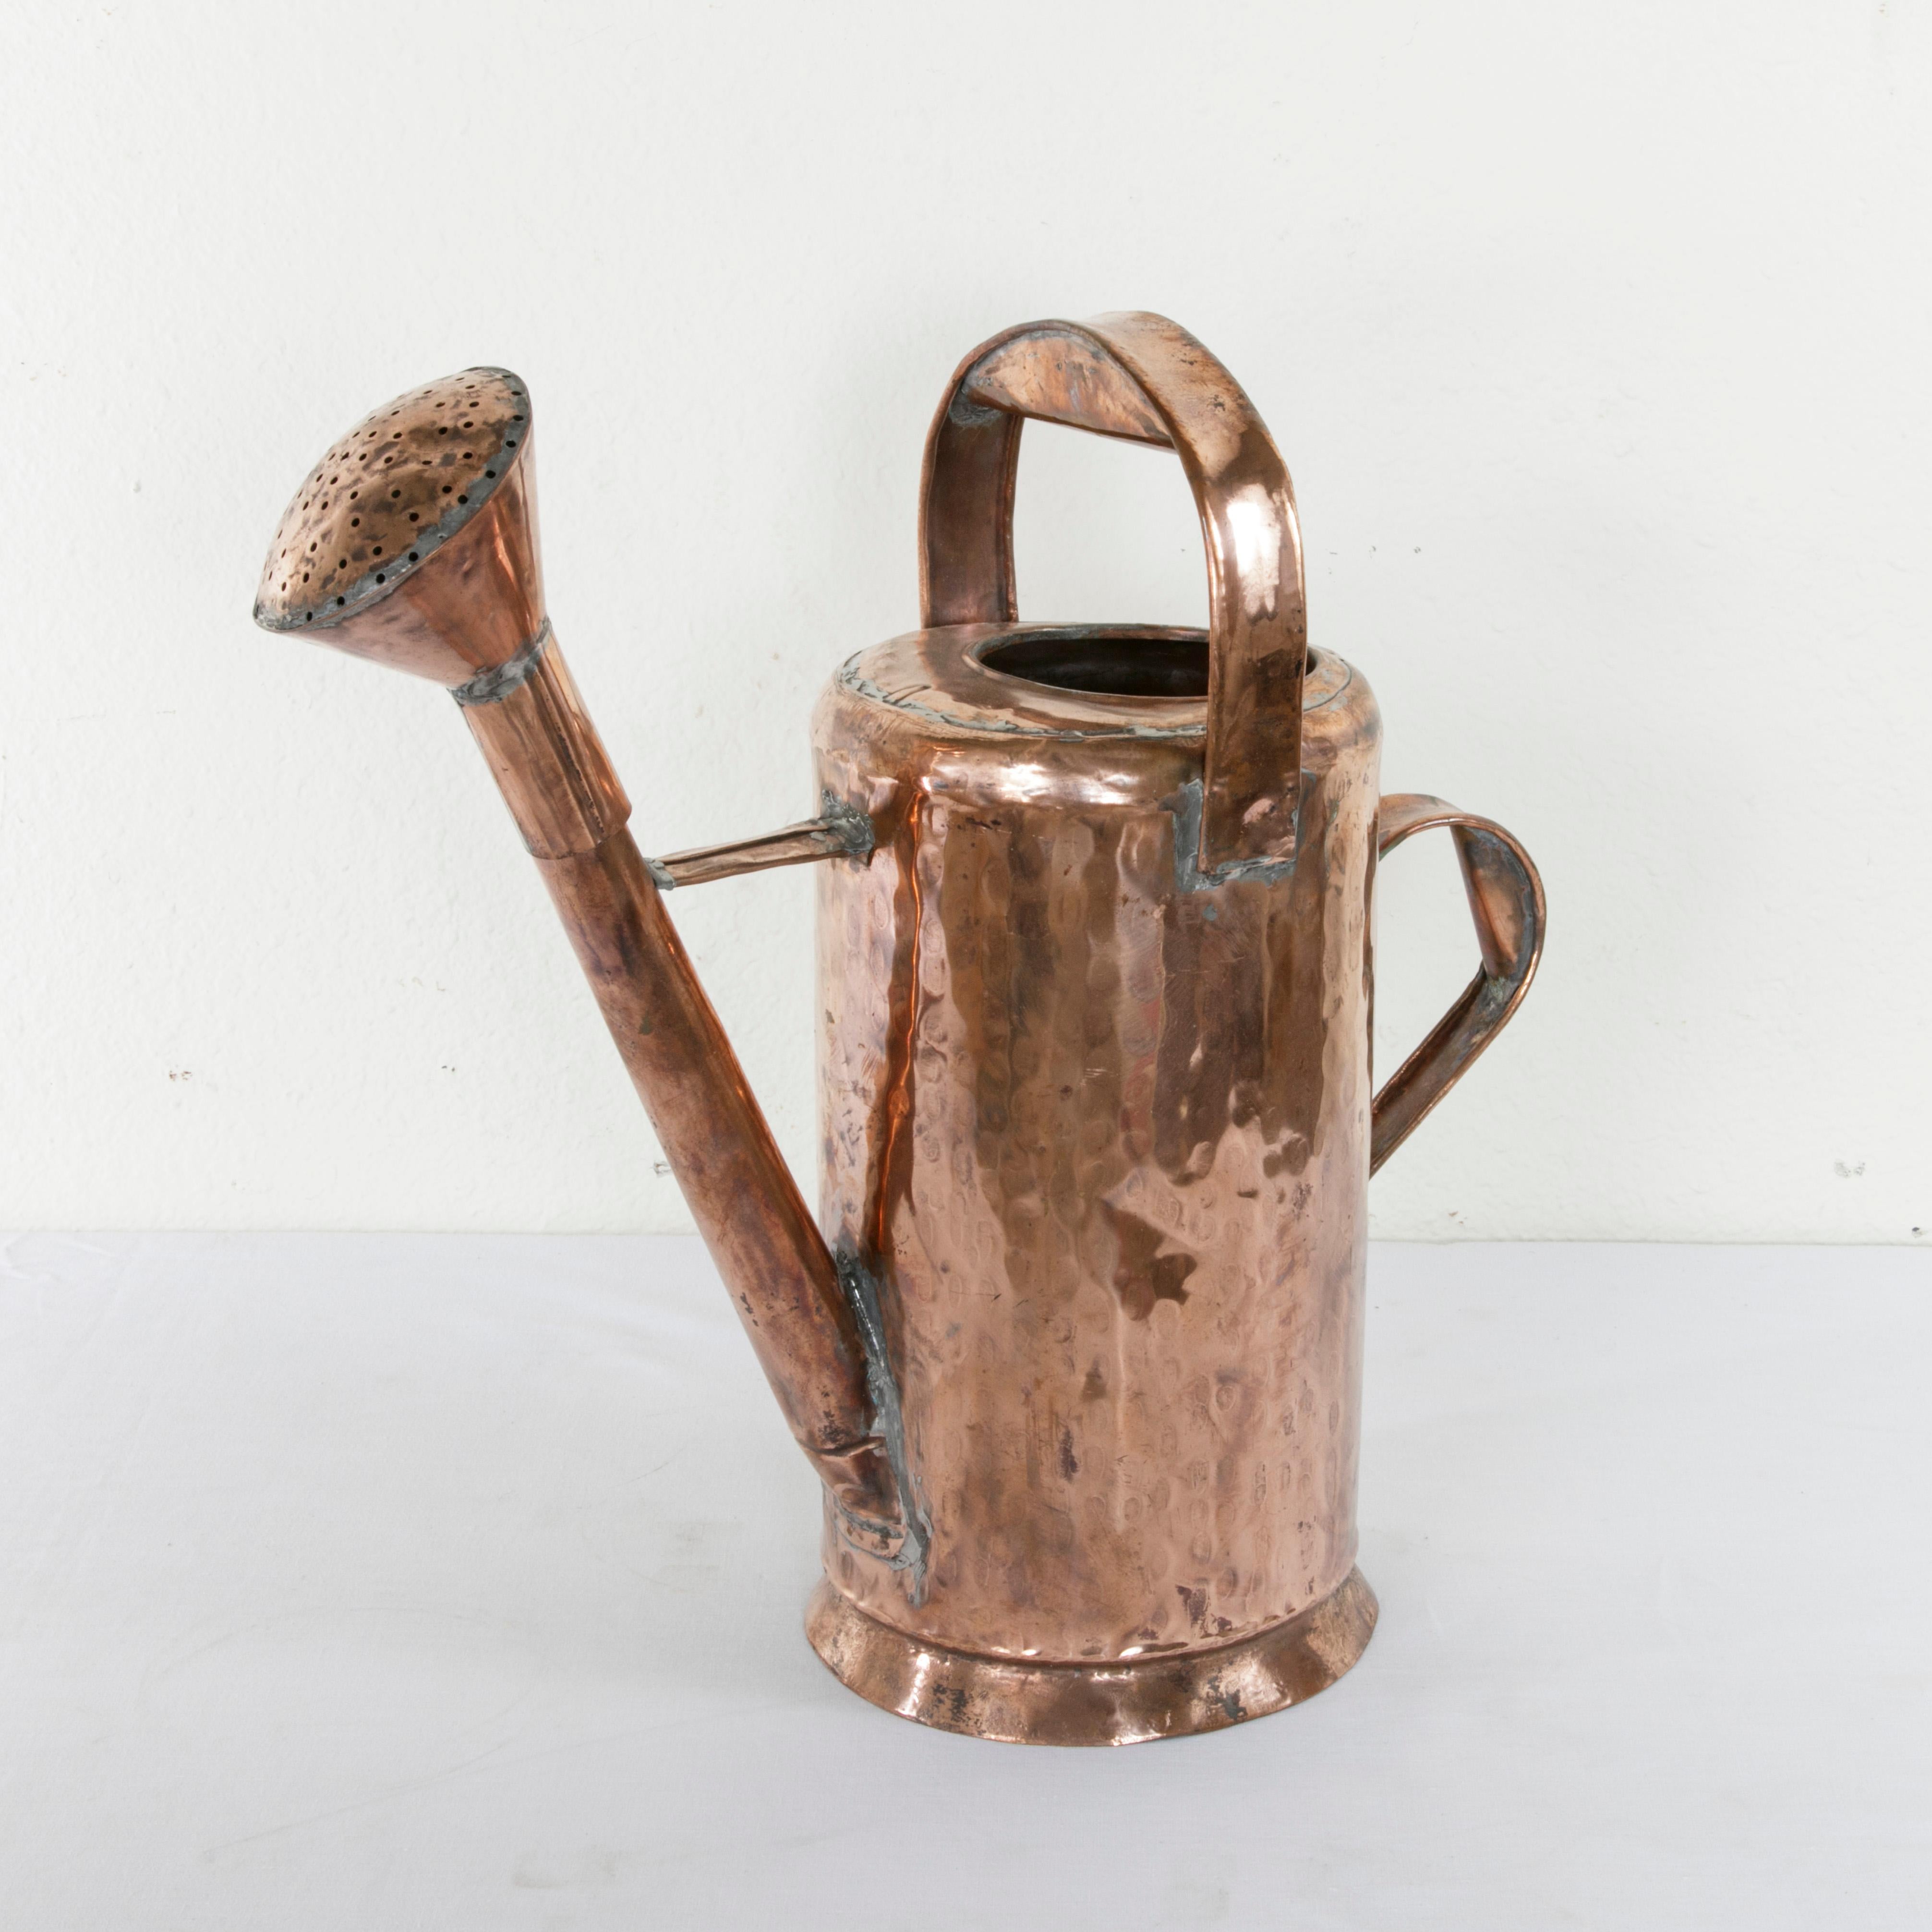 This large scale French hand-hammered copper watering can from the late 19th century features a tall cylindrical form. The piece is fitted with two handles to allow for easier pouring. A pierced copper rose at the end of its spout is removable. A